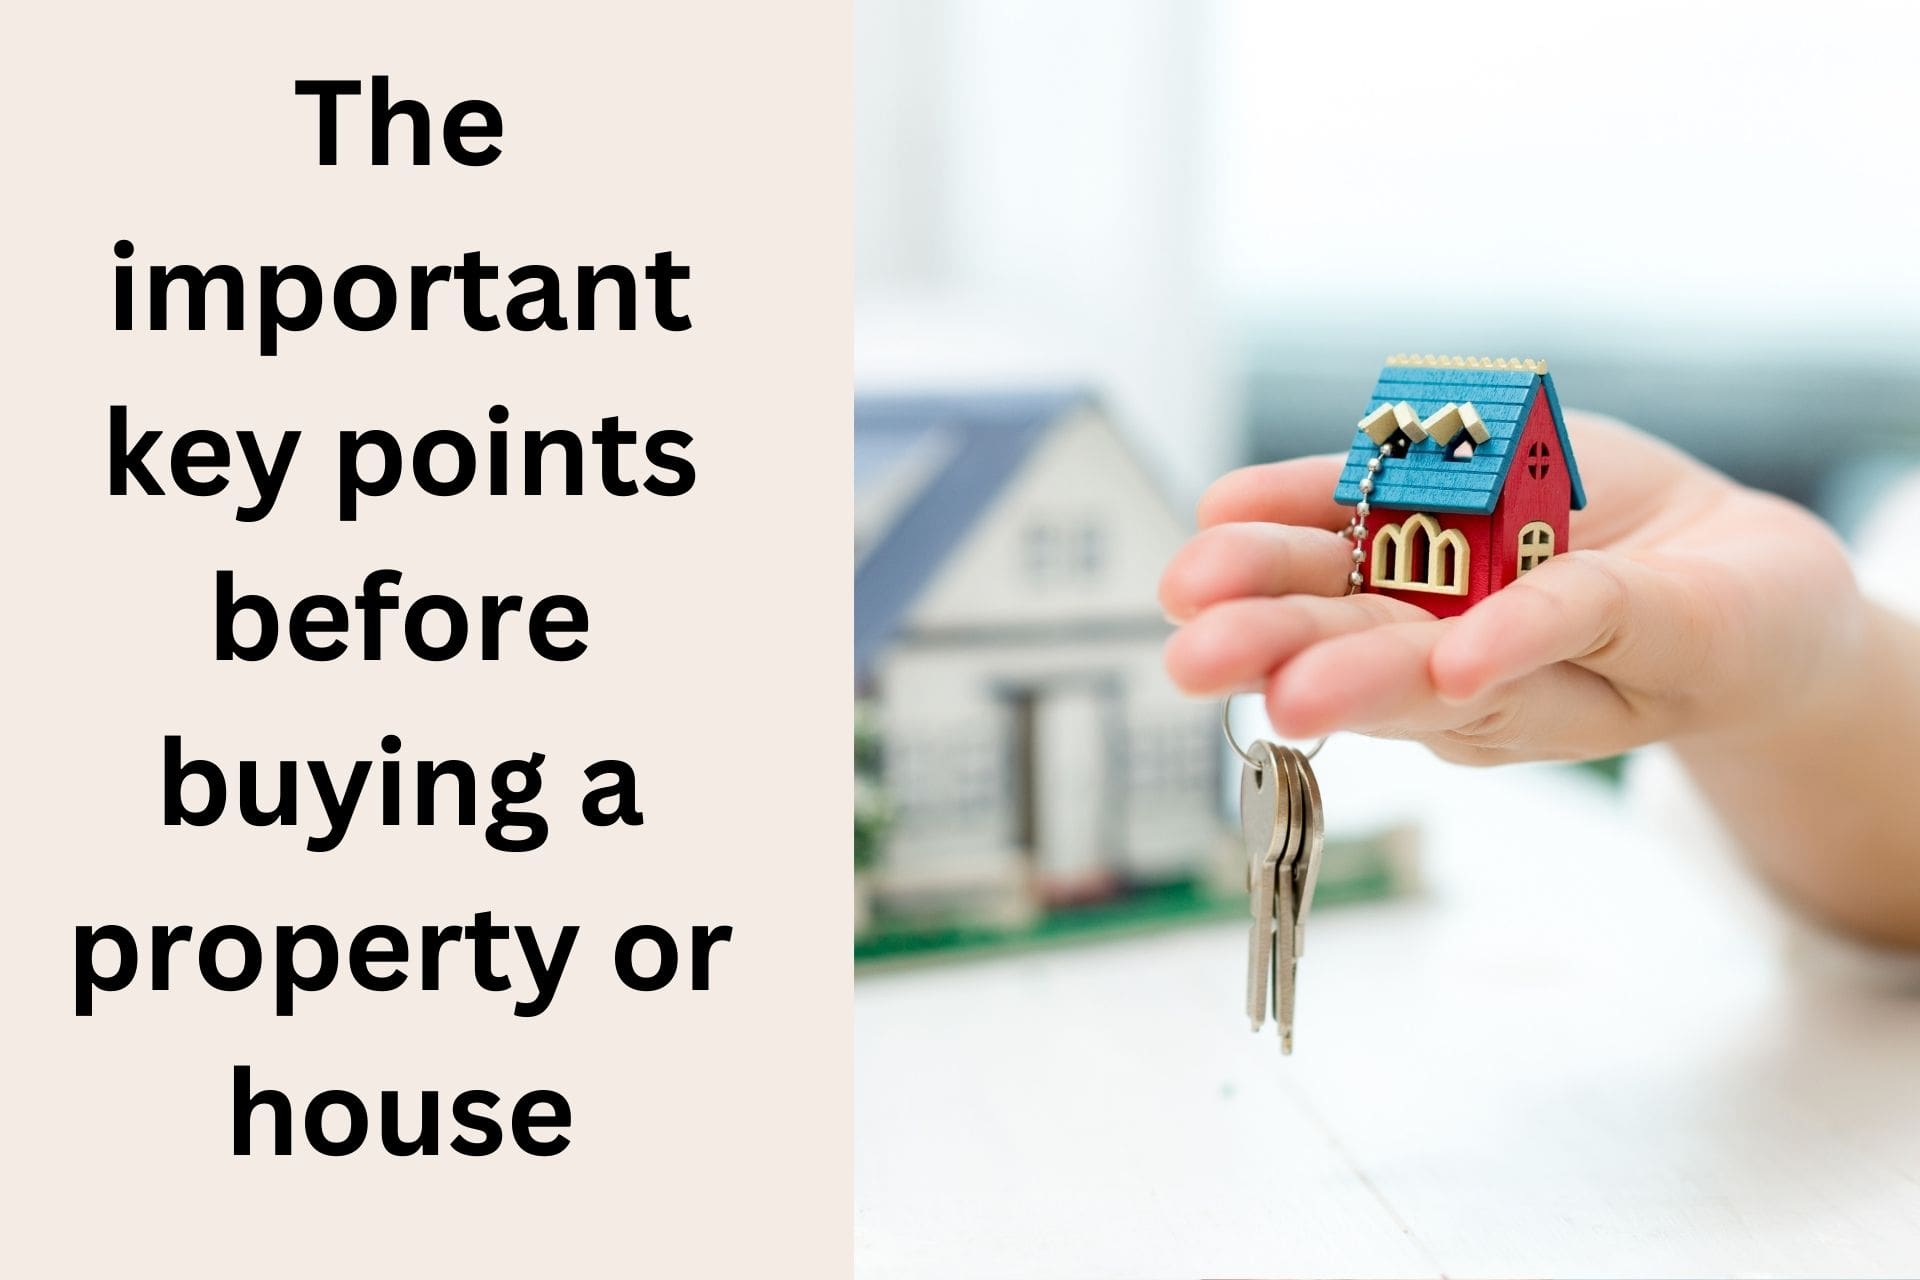 The important key points before buying a property or house